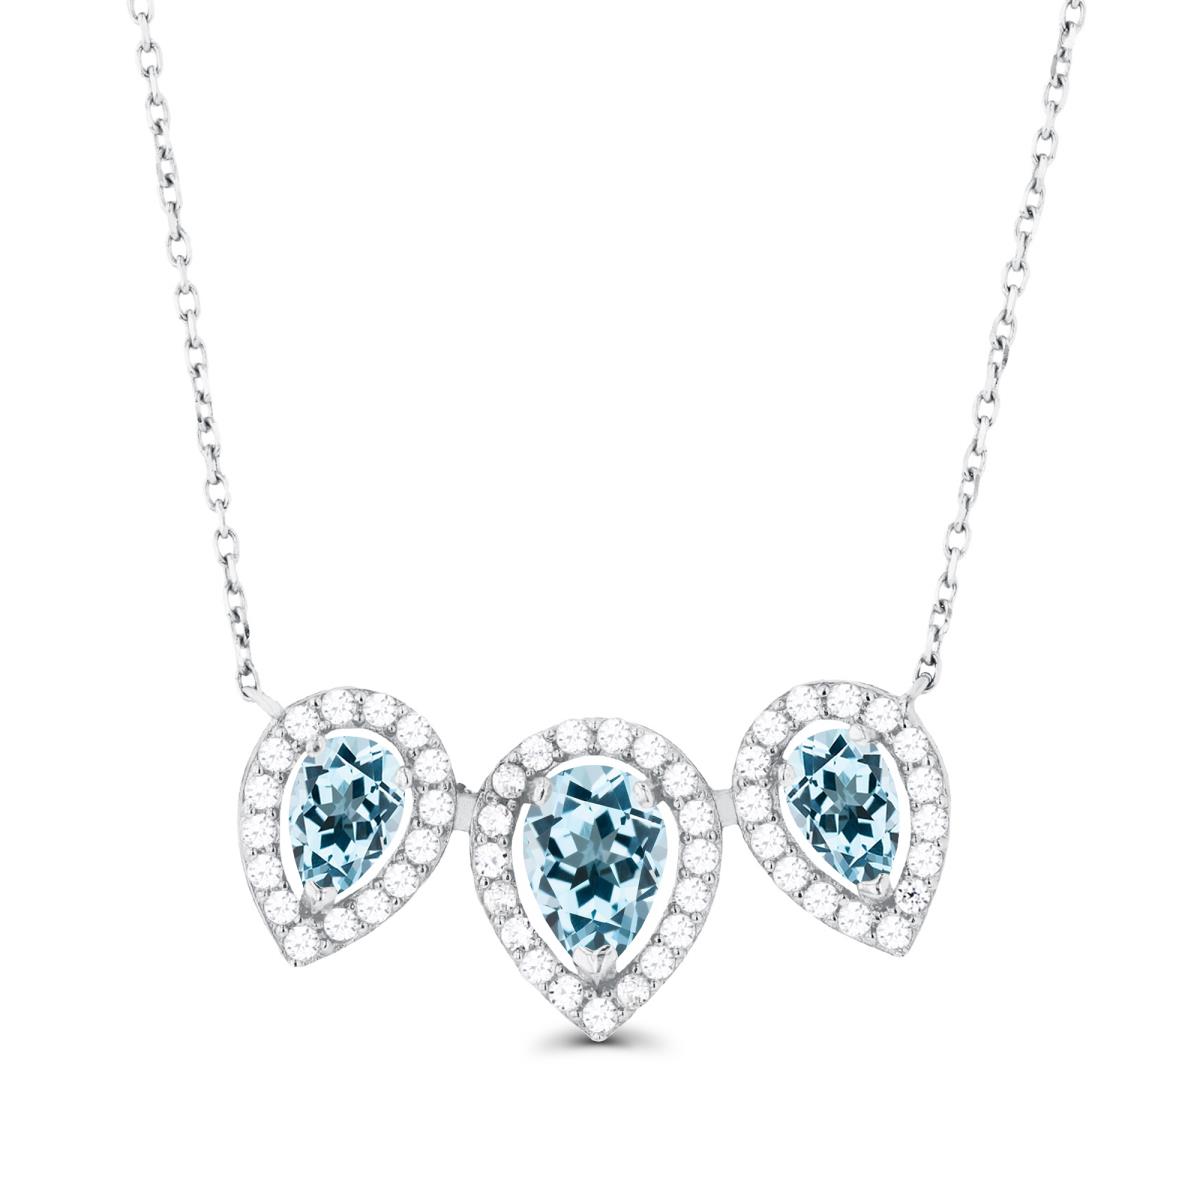 14K White Gold Triple Pear Sky Blue Topaz & Created White Sapphire Halo 18"Necklace